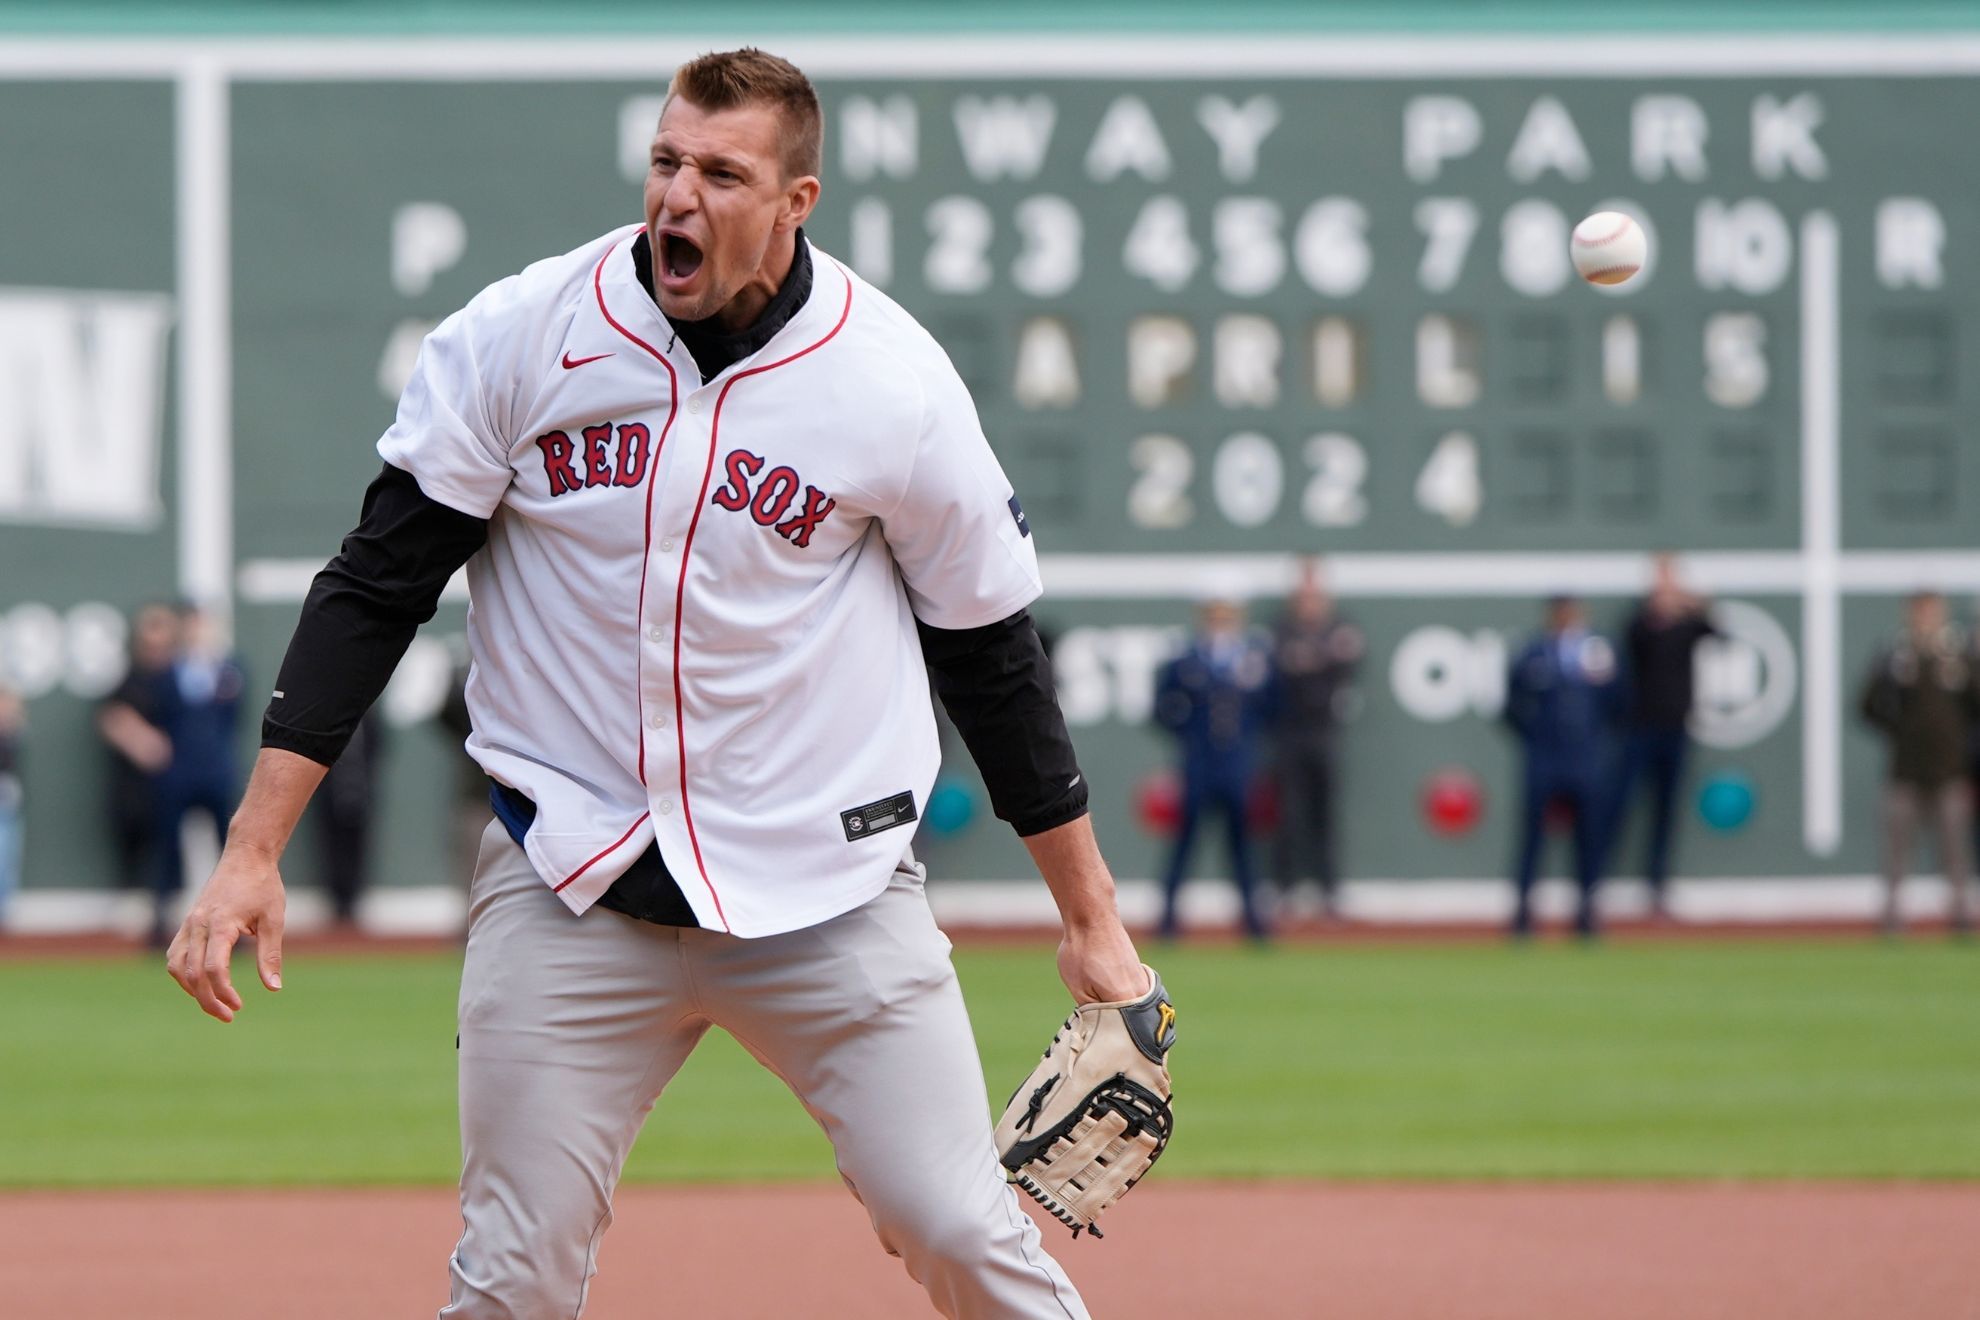 Rob Gronkowski throws first pitch at Red Sox game in true Gronk fashion